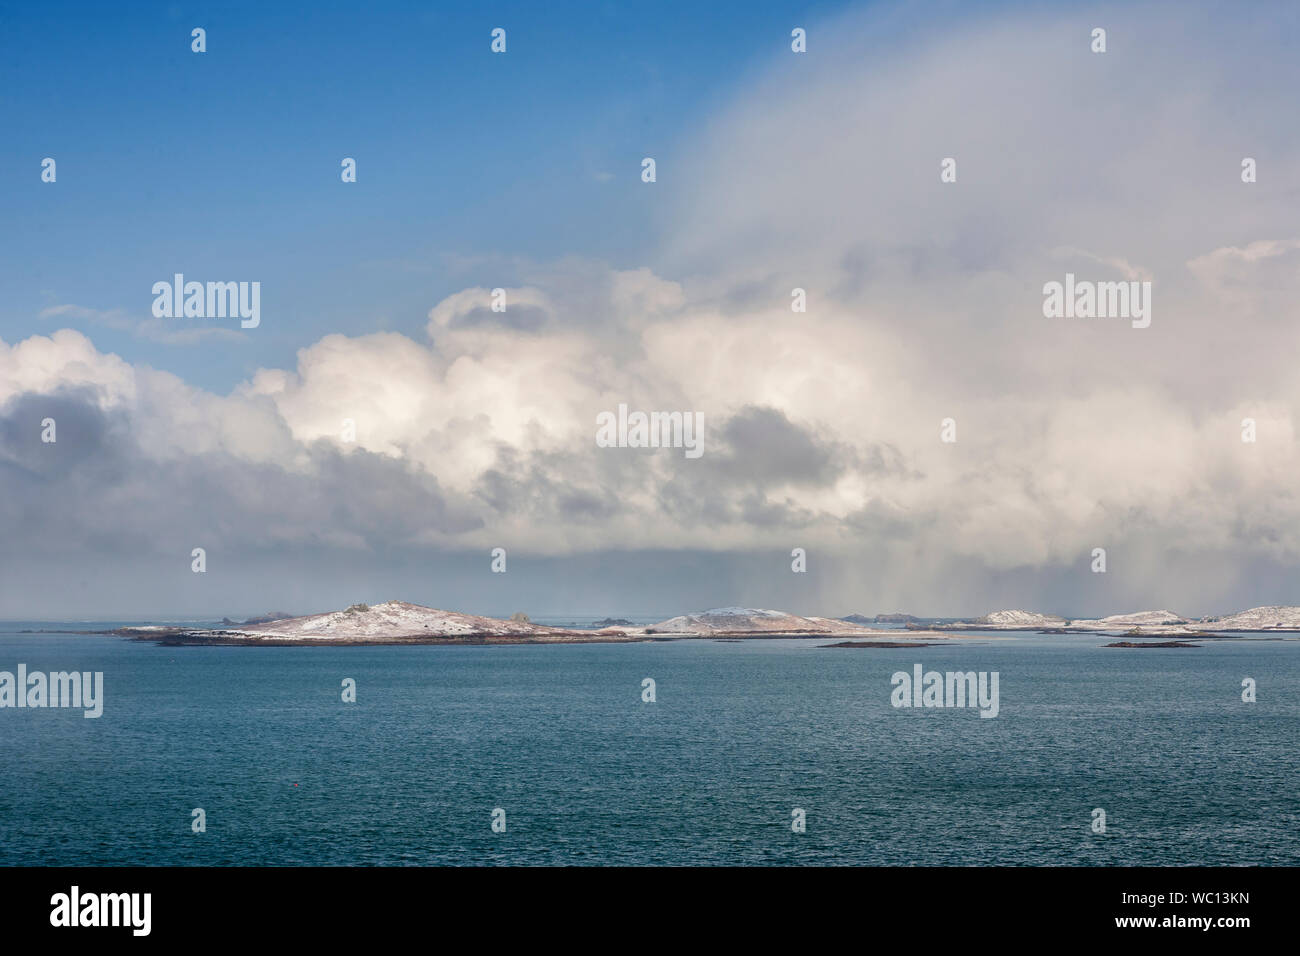 Samson and the Western Rocks from the Garrison, St. Mary's, Isles of Scilly, UK, after a rare fall of snow Stock Photo